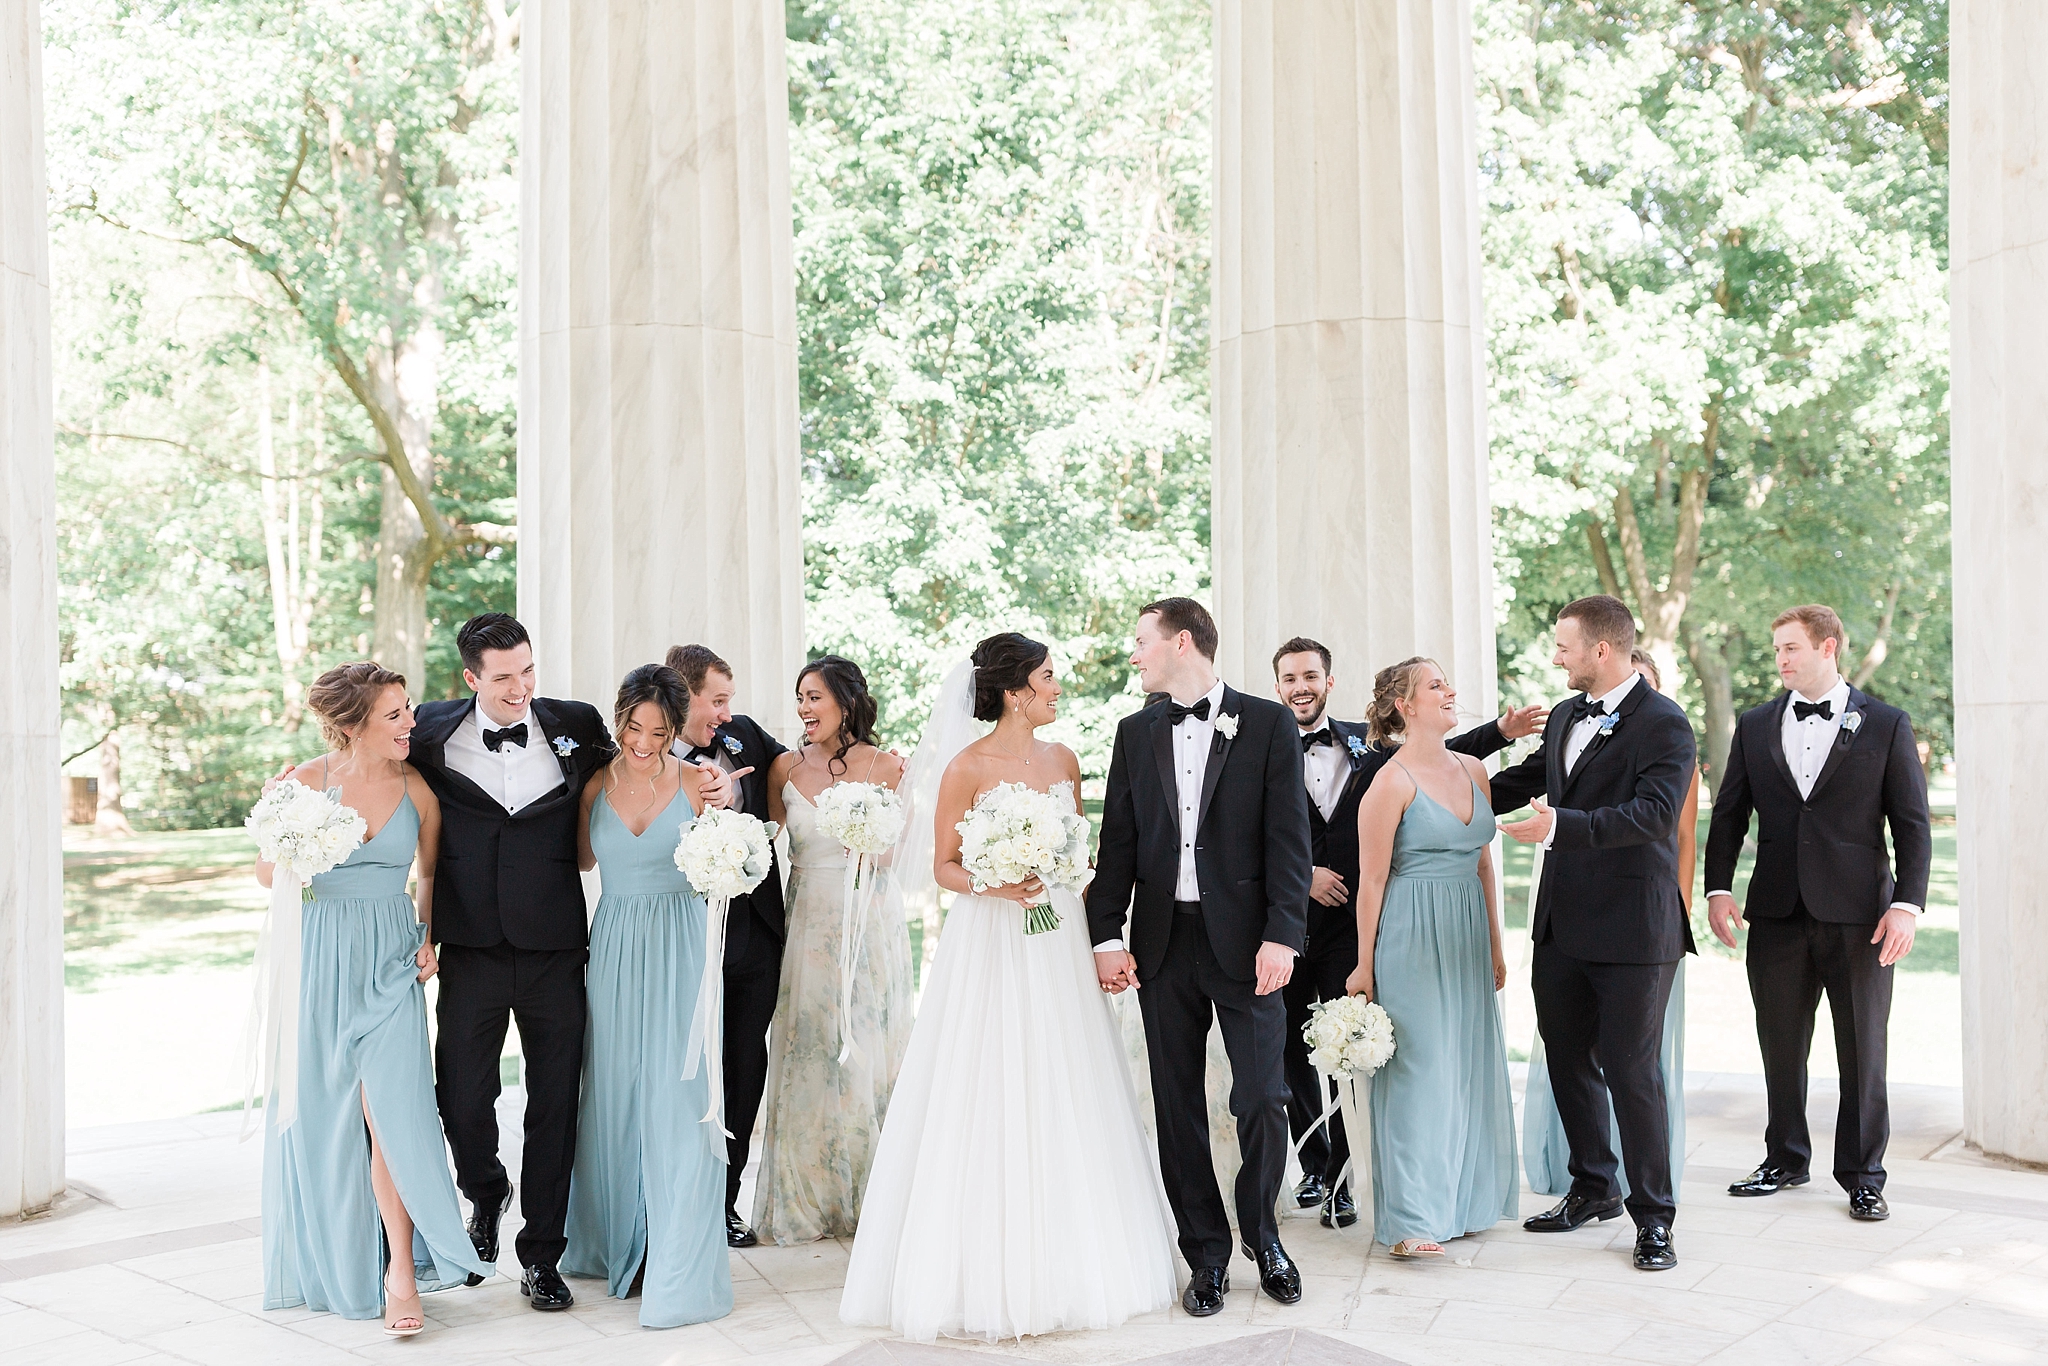 This sweet couple was married in a romantic ceremony ath the iconic St. Matthews Cathedral in Washington, DC and celebrated with a reception at the National Museum of Women in the Arts.